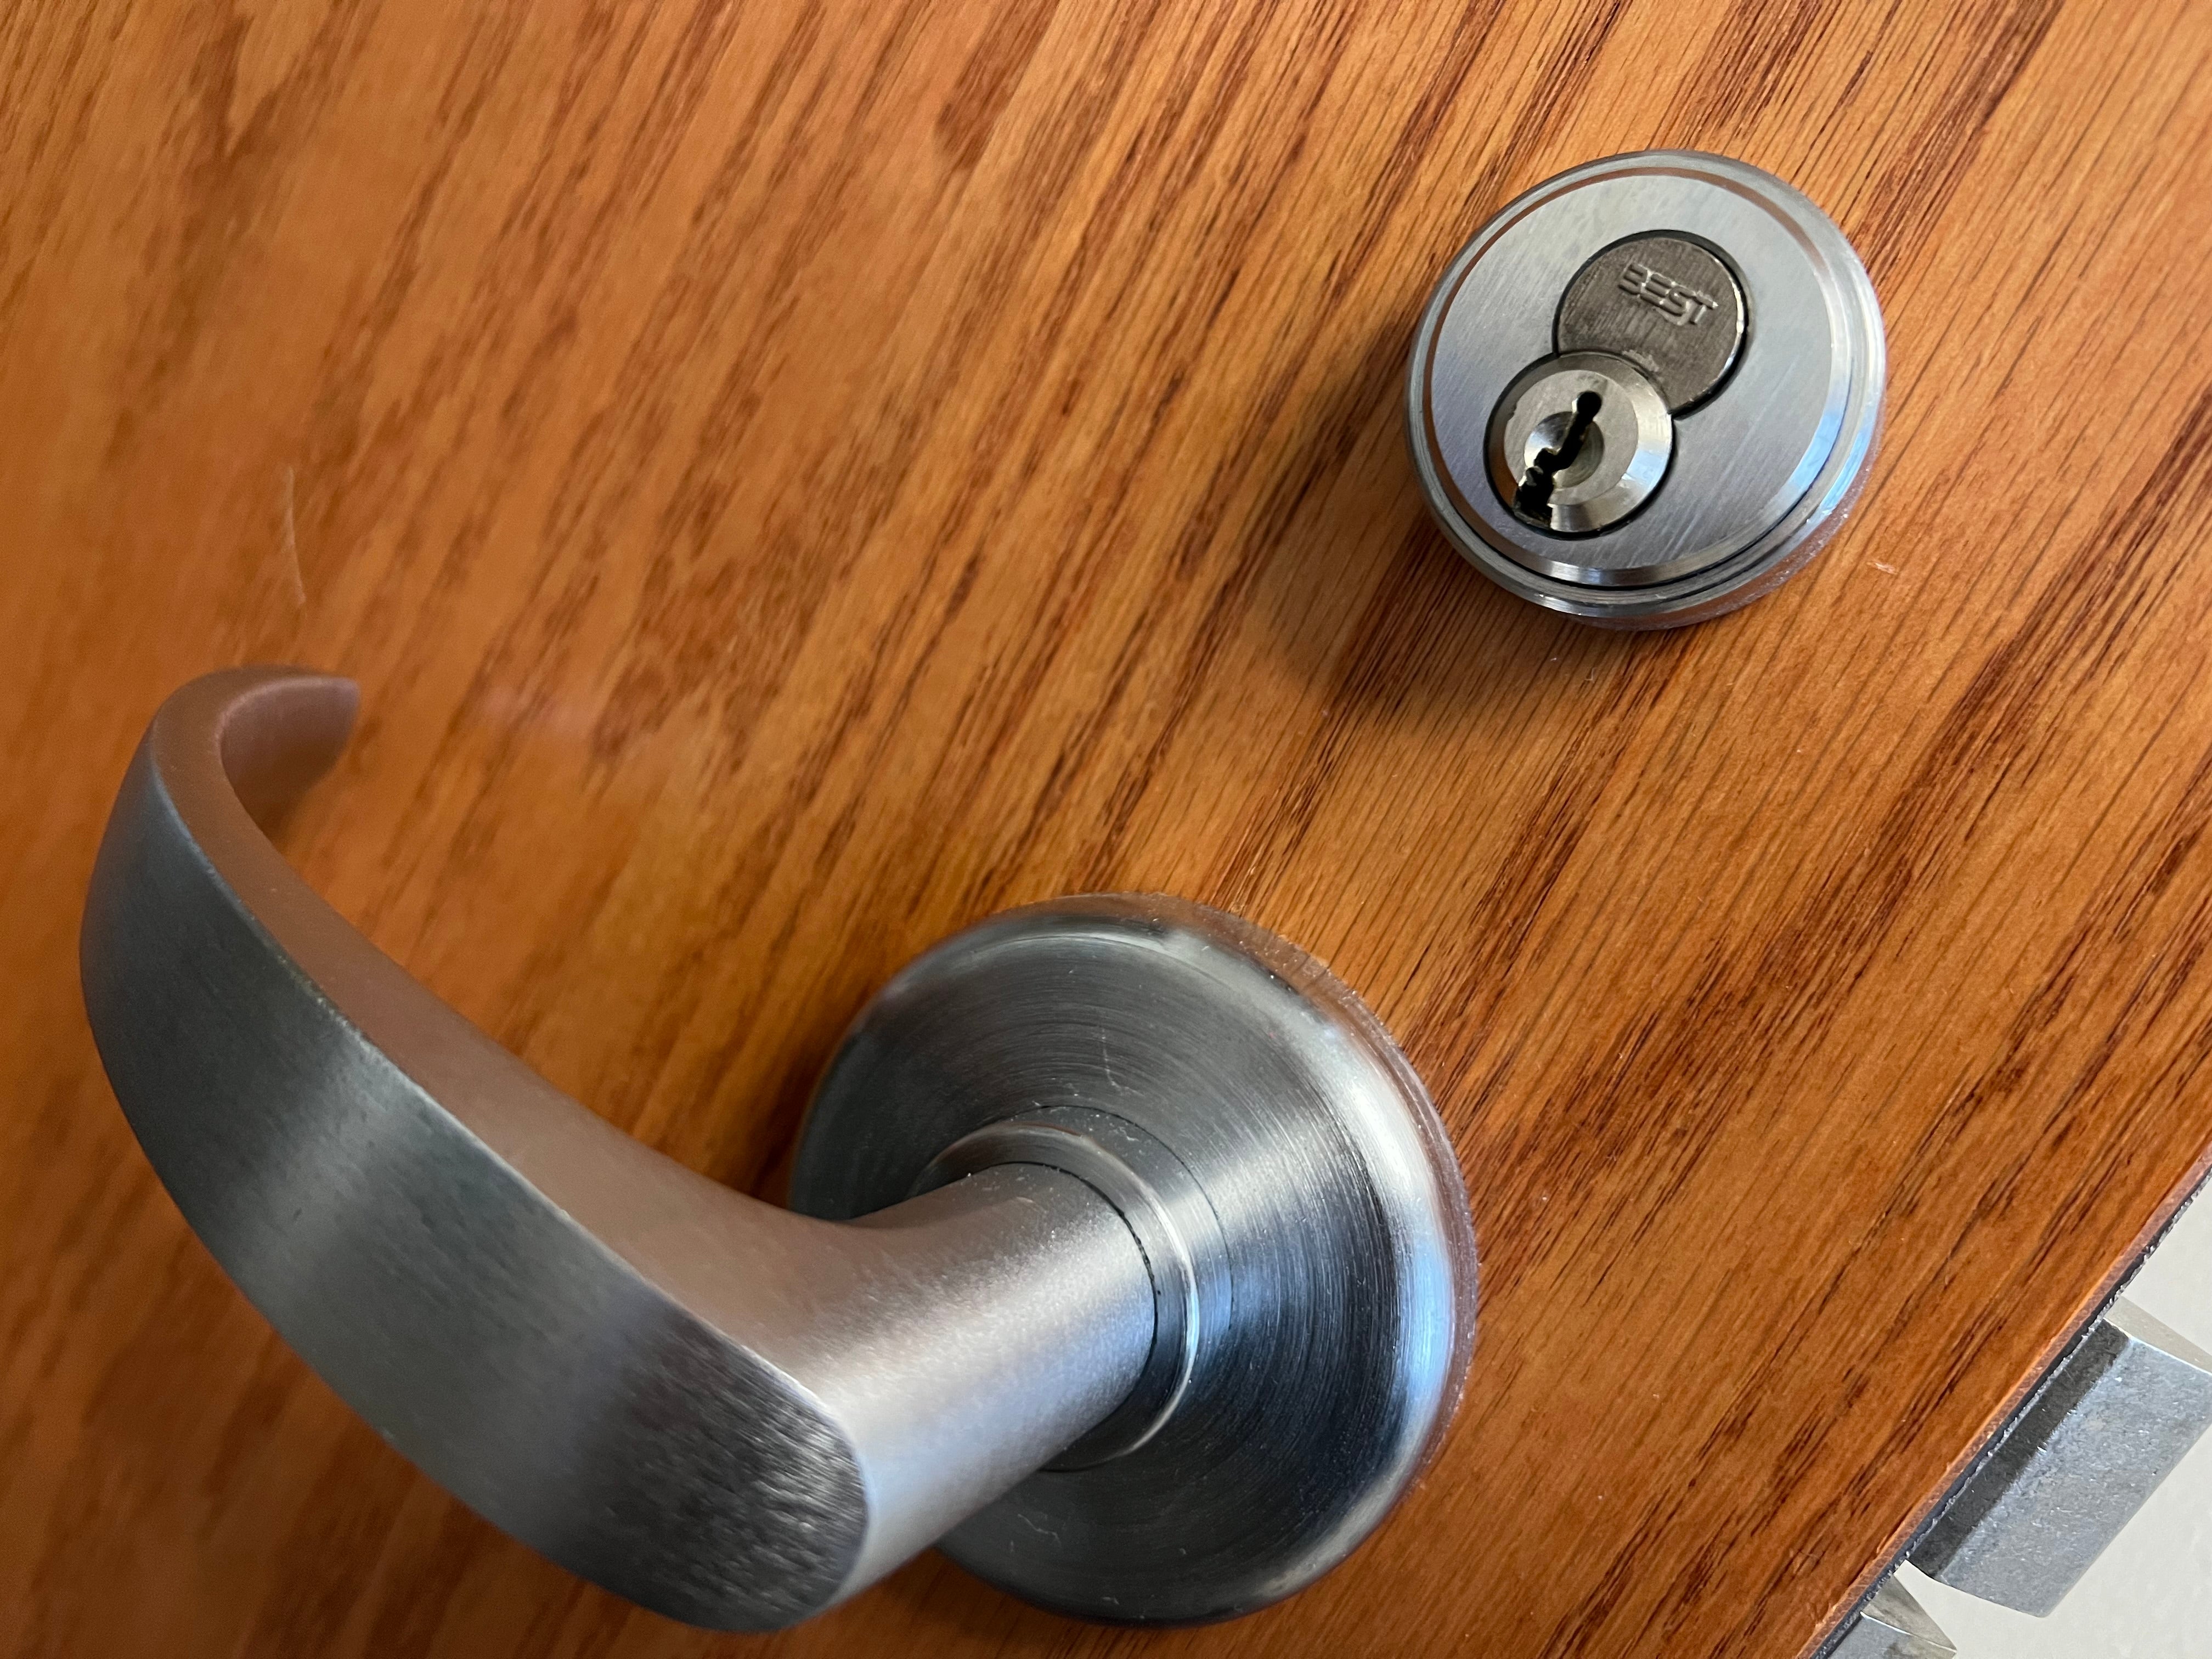 Why Locking Your Doors Will Prevent Against a Home Invasion